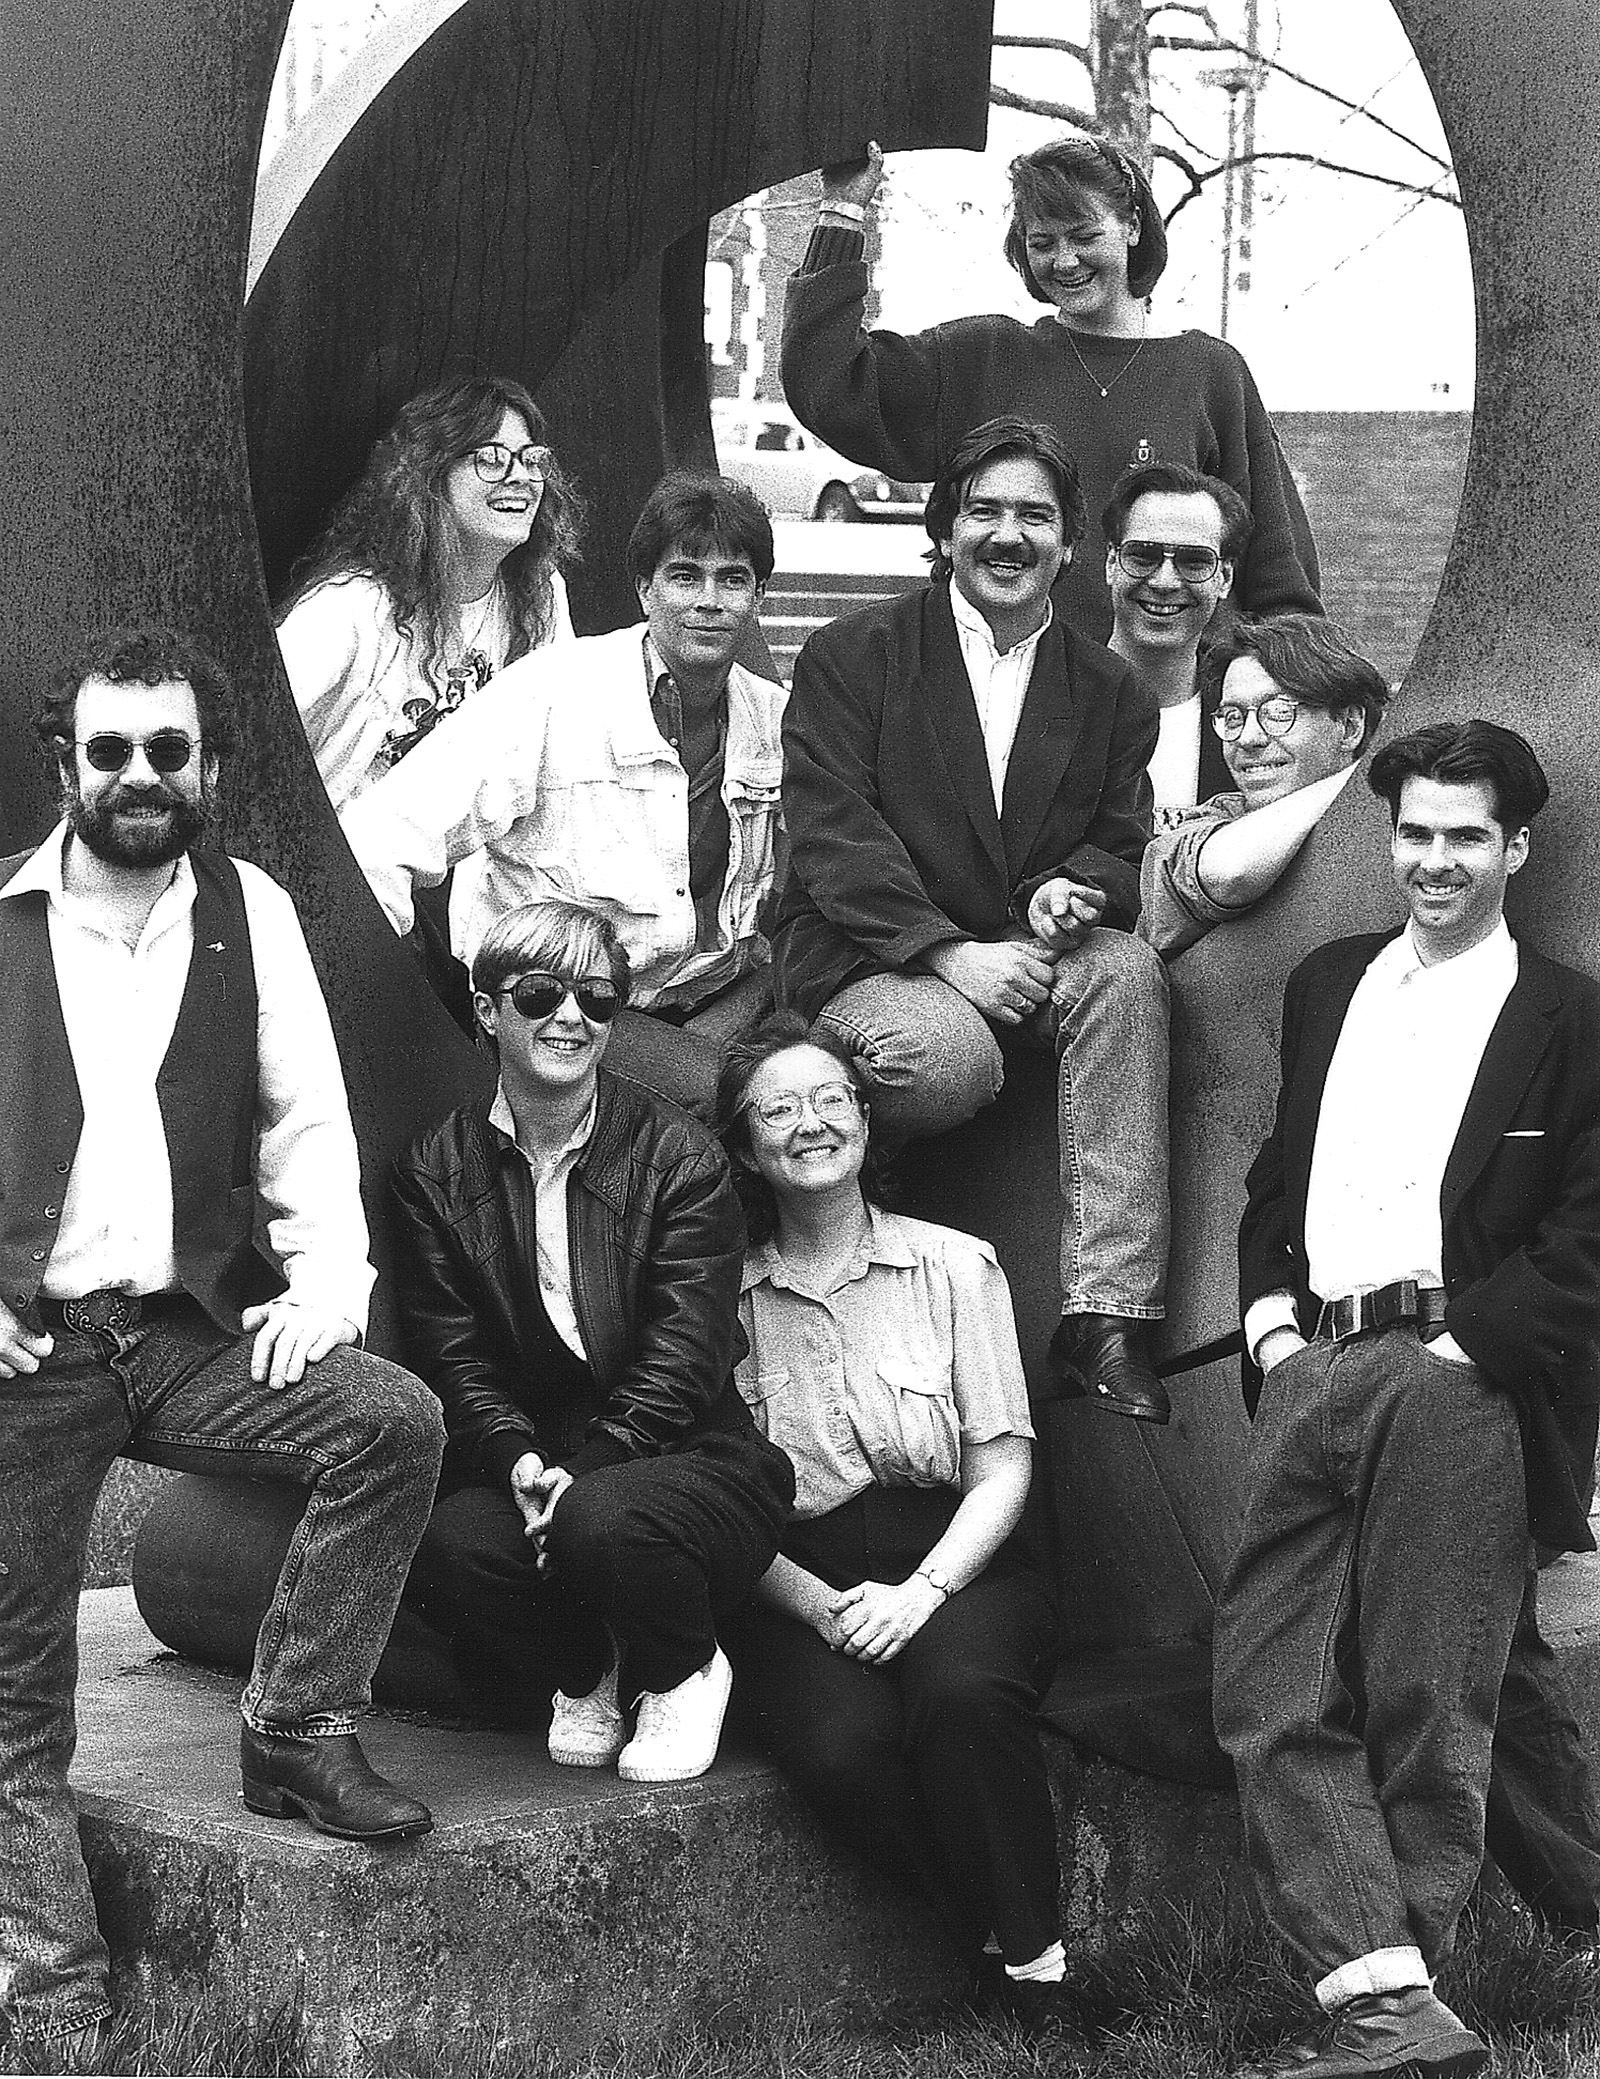 SIFF staff, including festival founder, Darryl Macdonald (center), long-time SIFF contributor and Associate Director in 1989, Ruth Hayler (bottom center), and 1989 Marketing Director, Nancy King (bottom, second from left)